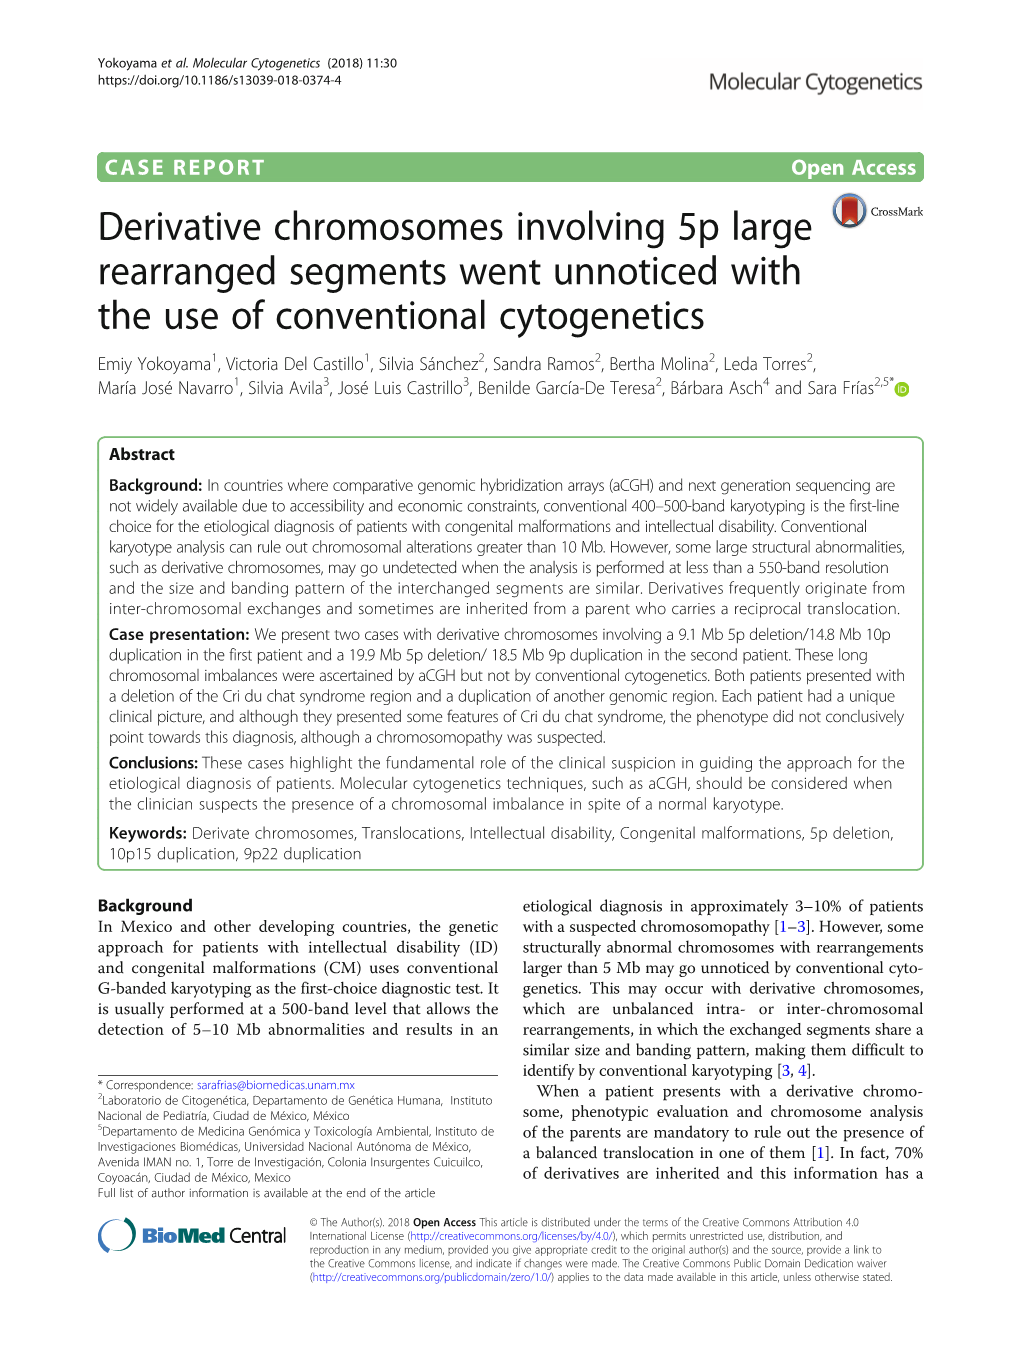 Derivative Chromosomes Involving 5P Large Rearranged Segments Went Unnoticed with the Use of Conventional Cytogenetics